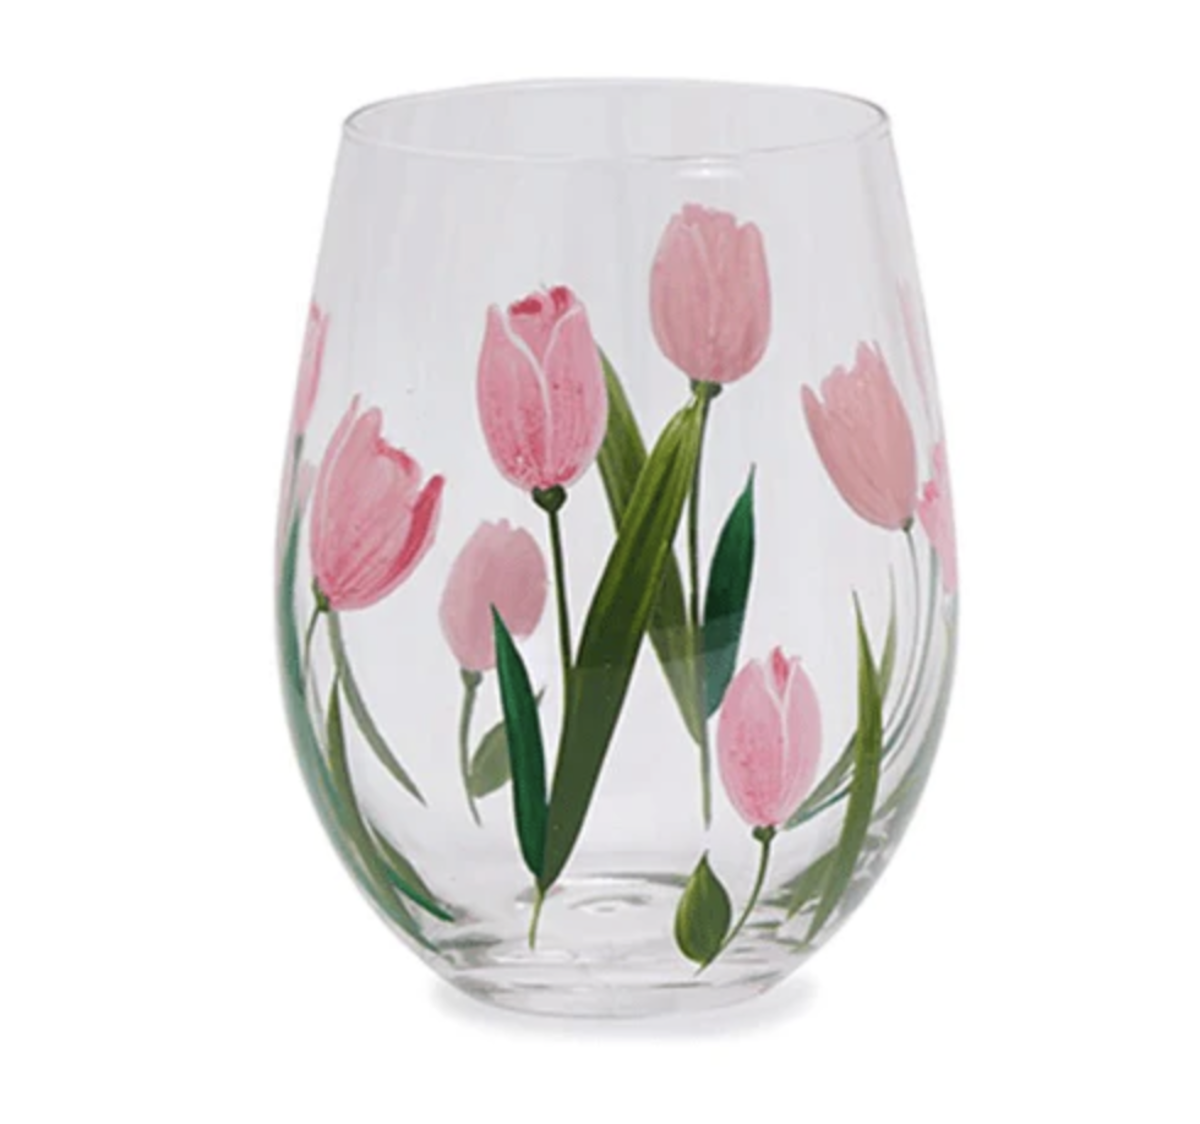 2 Wine Glasses With Pink Tulip Frosted Flowers Wine Glass Set of